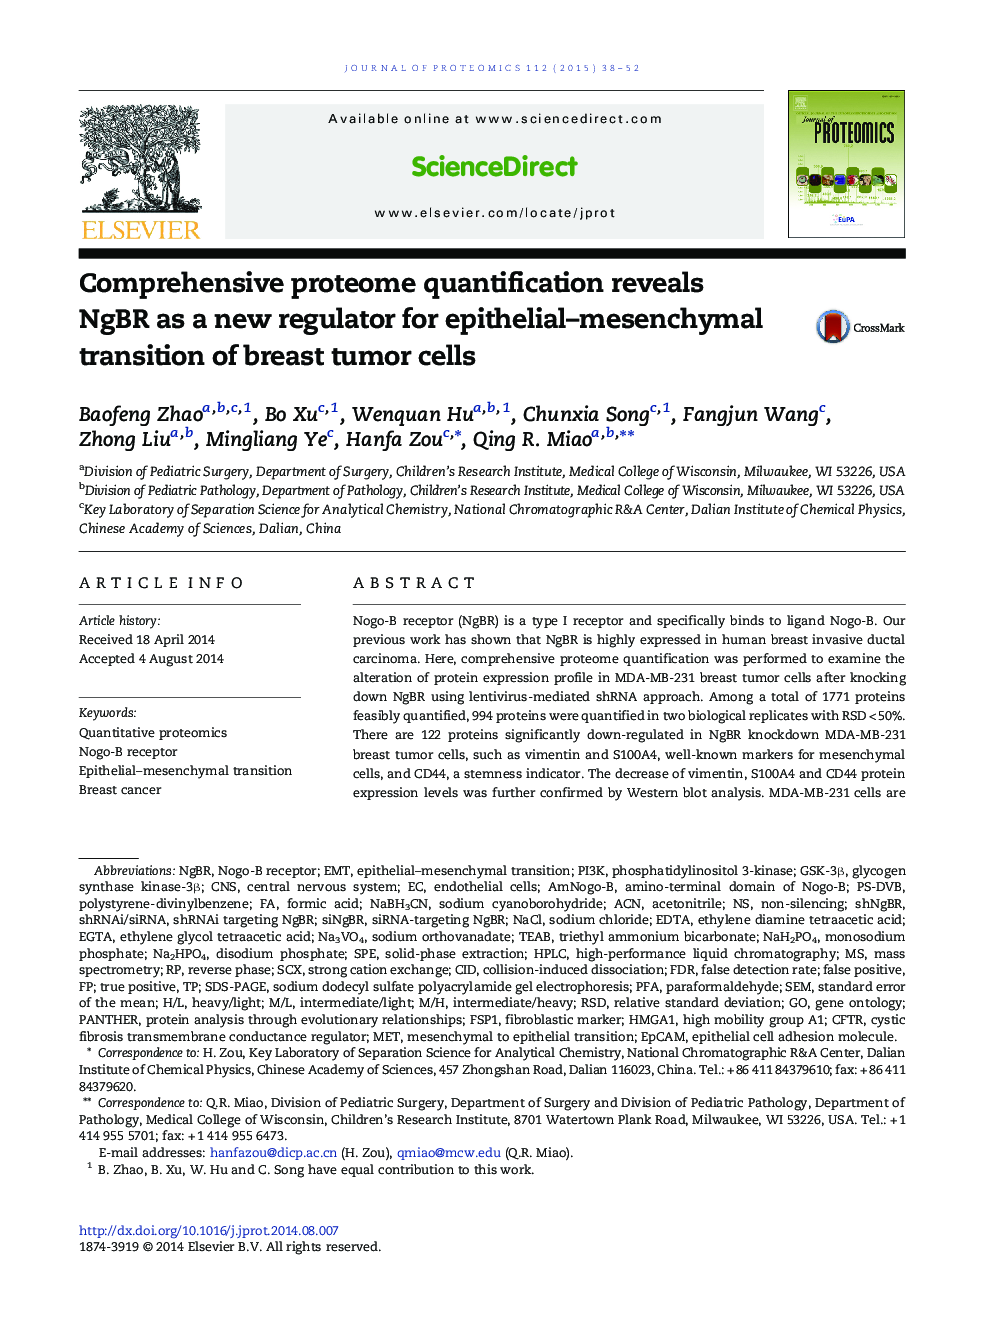 Comprehensive proteome quantification reveals NgBR as a new regulator for epithelial-mesenchymal transition of breast tumor cells